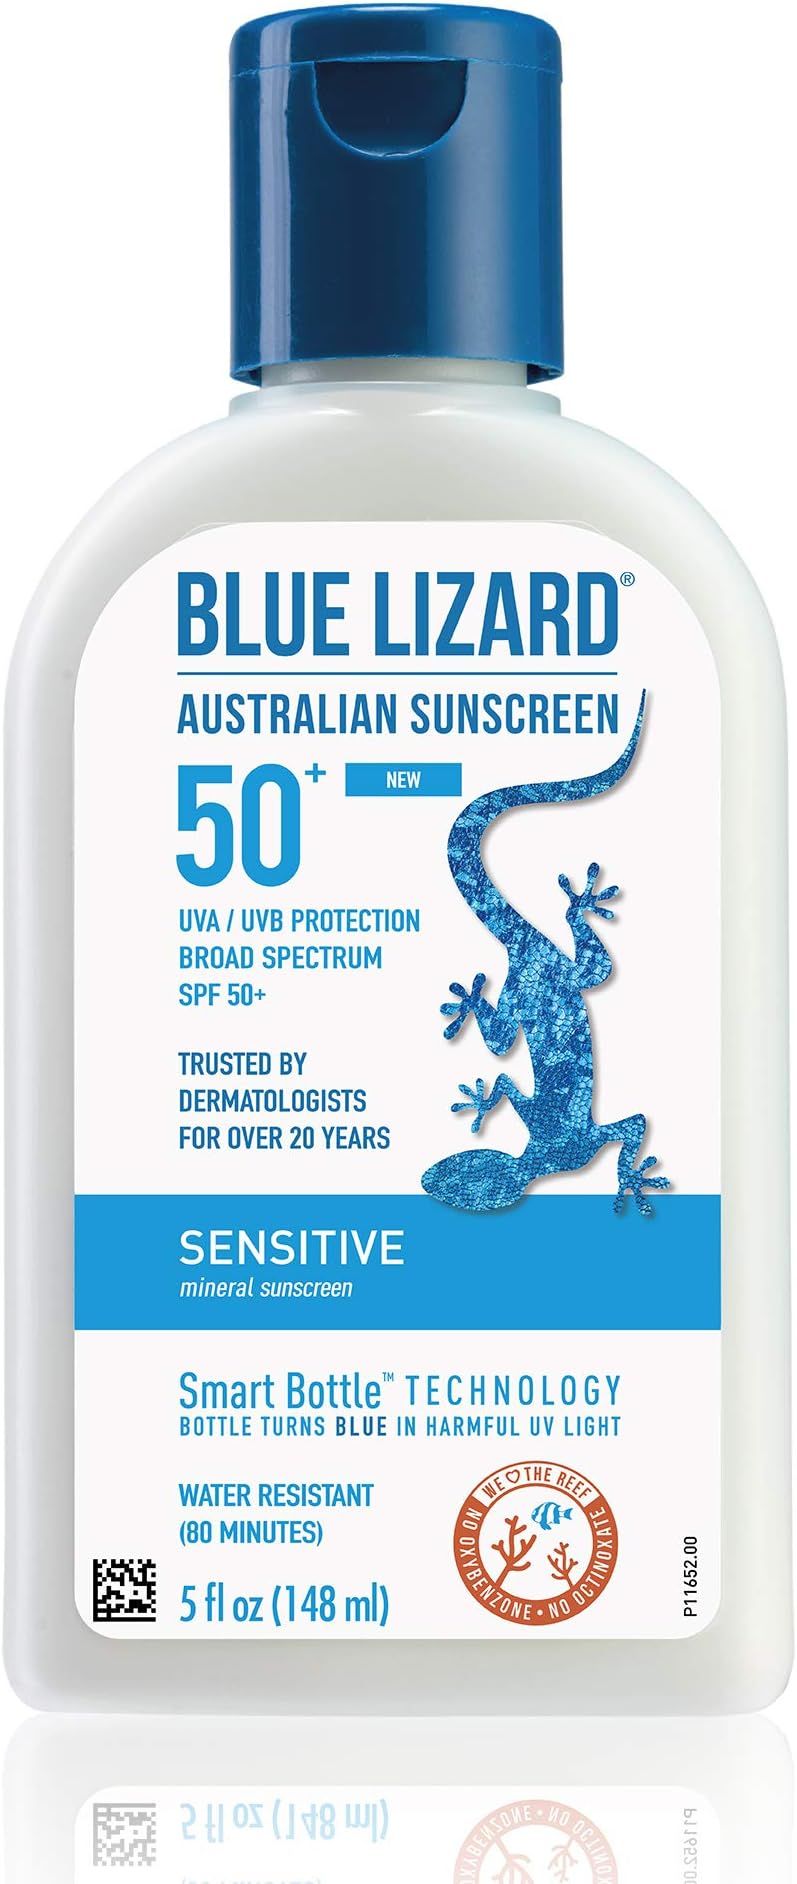 BLUE LIZARD Sensitive Mineral Sunscreen with Zinc Oxide, SPF 50+, Water Resistant, UVA/UVB Protectio | Amazon (US)